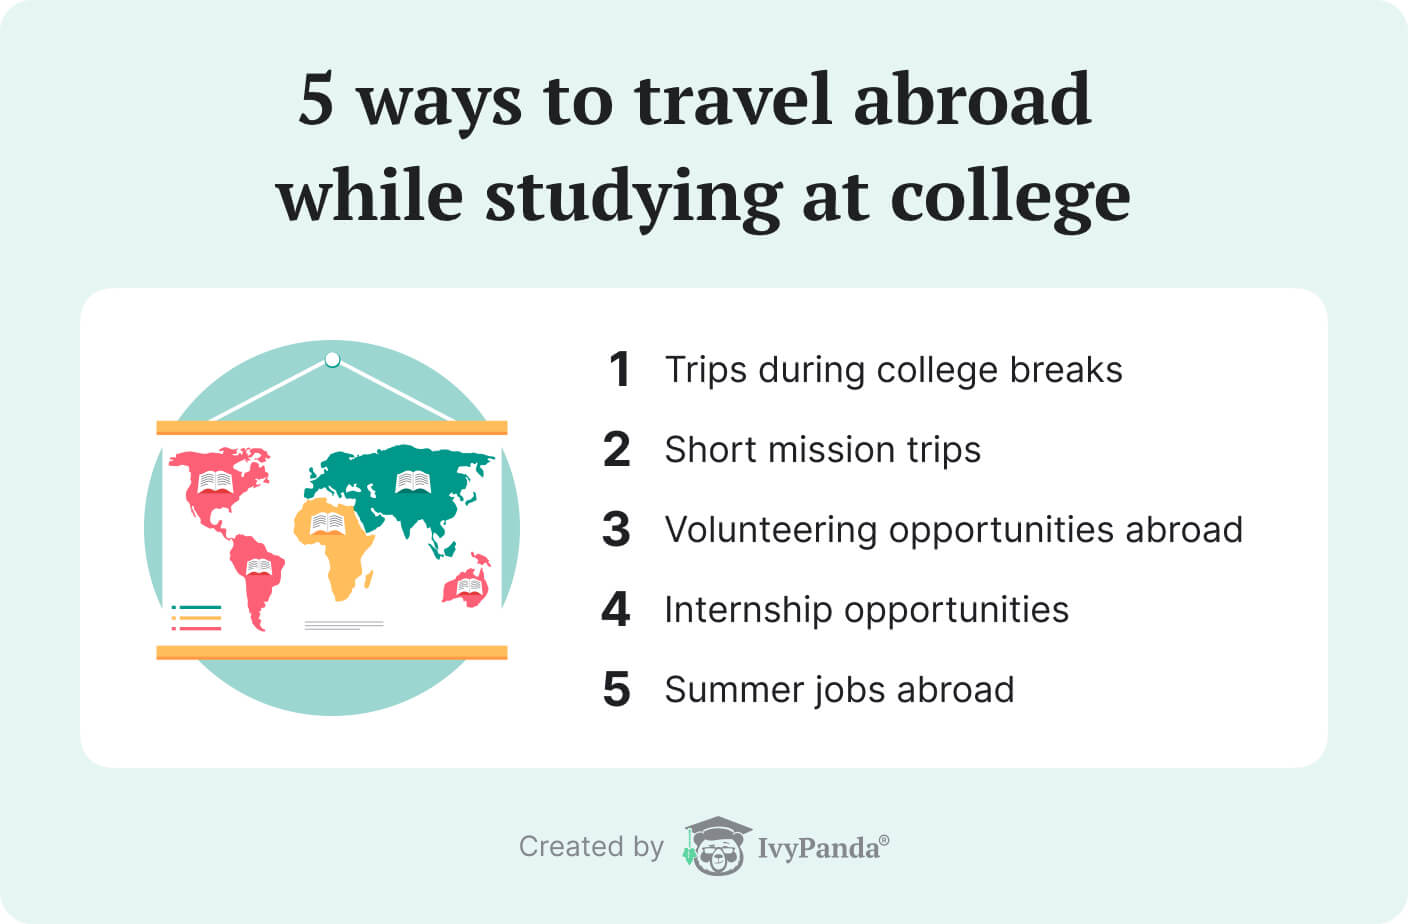 The picture contains a list of tips on traveling abroad for college students.